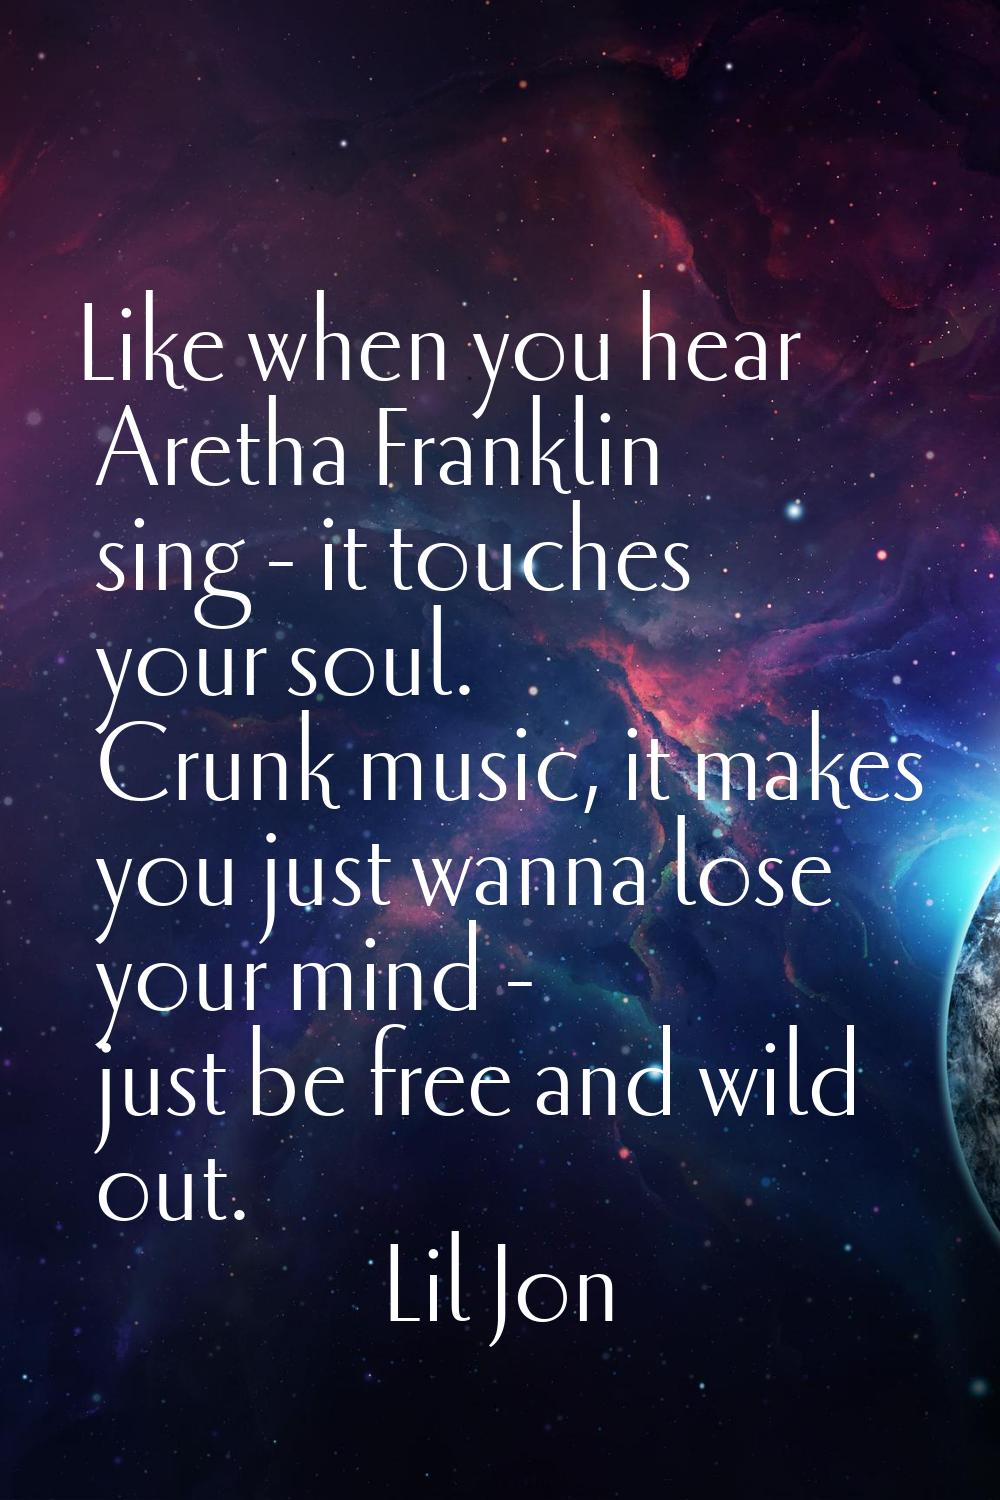 Like when you hear Aretha Franklin sing - it touches your soul. Crunk music, it makes you just wann